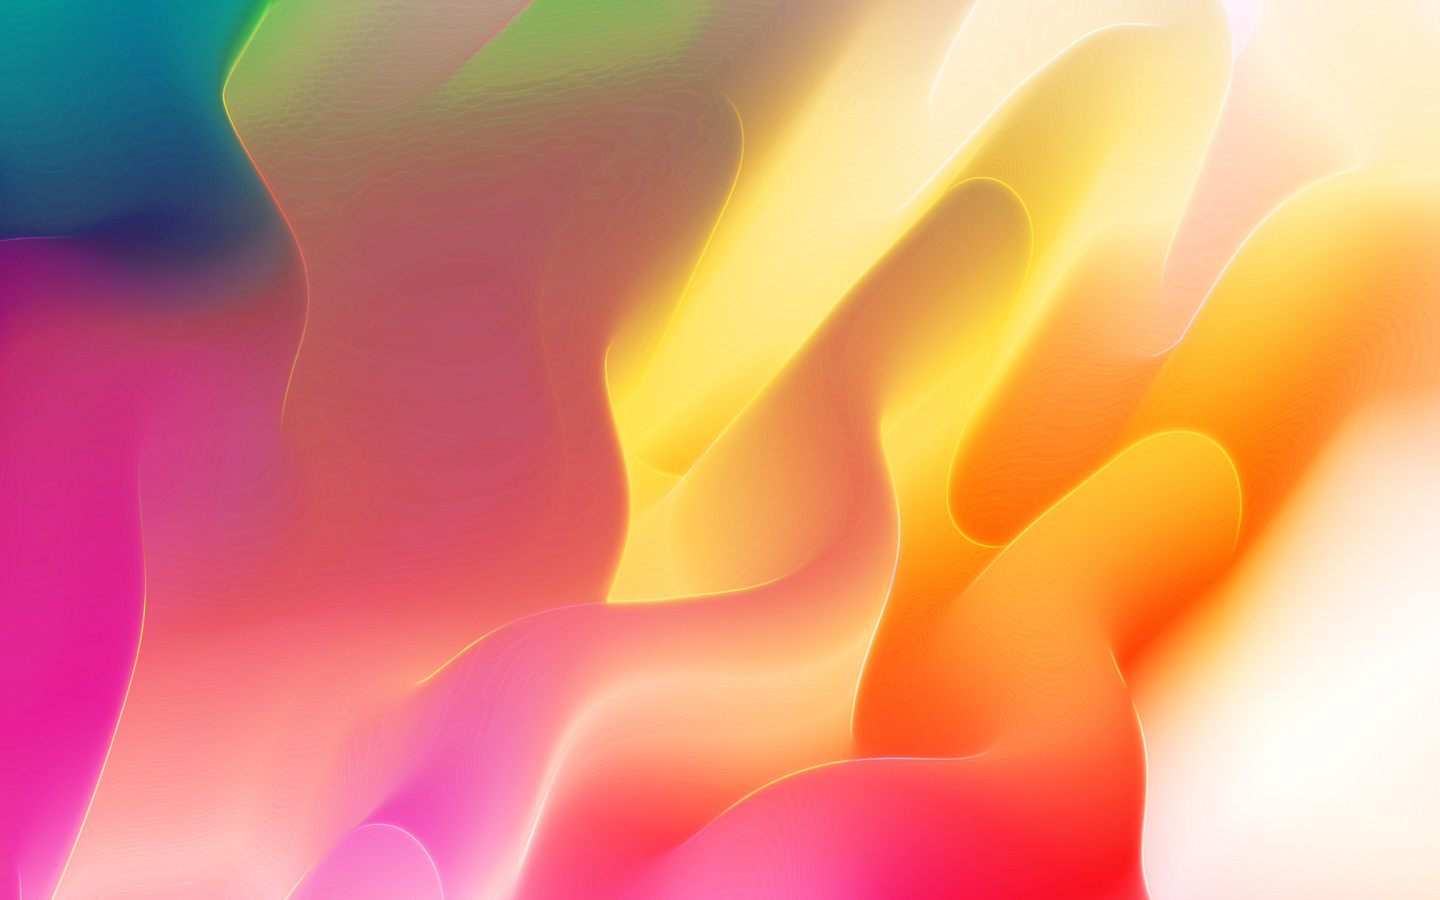 Multicolored gradient abstract pattern